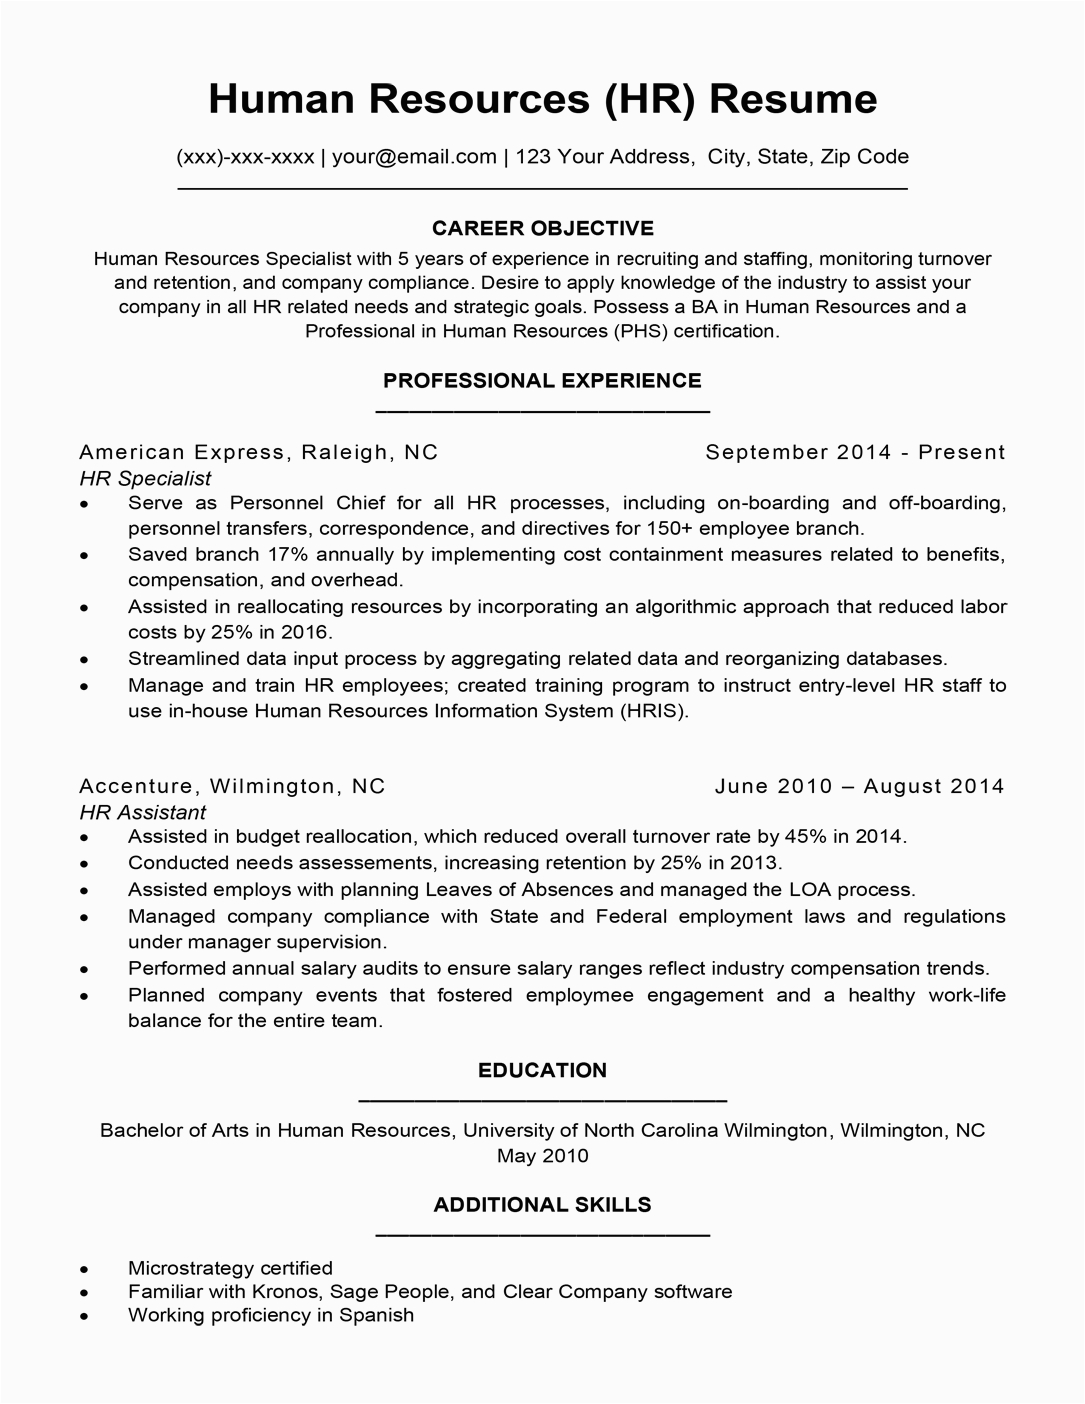 Human Resource Resume Examples and Samples Human Resources Resume Sample & Writing Tips